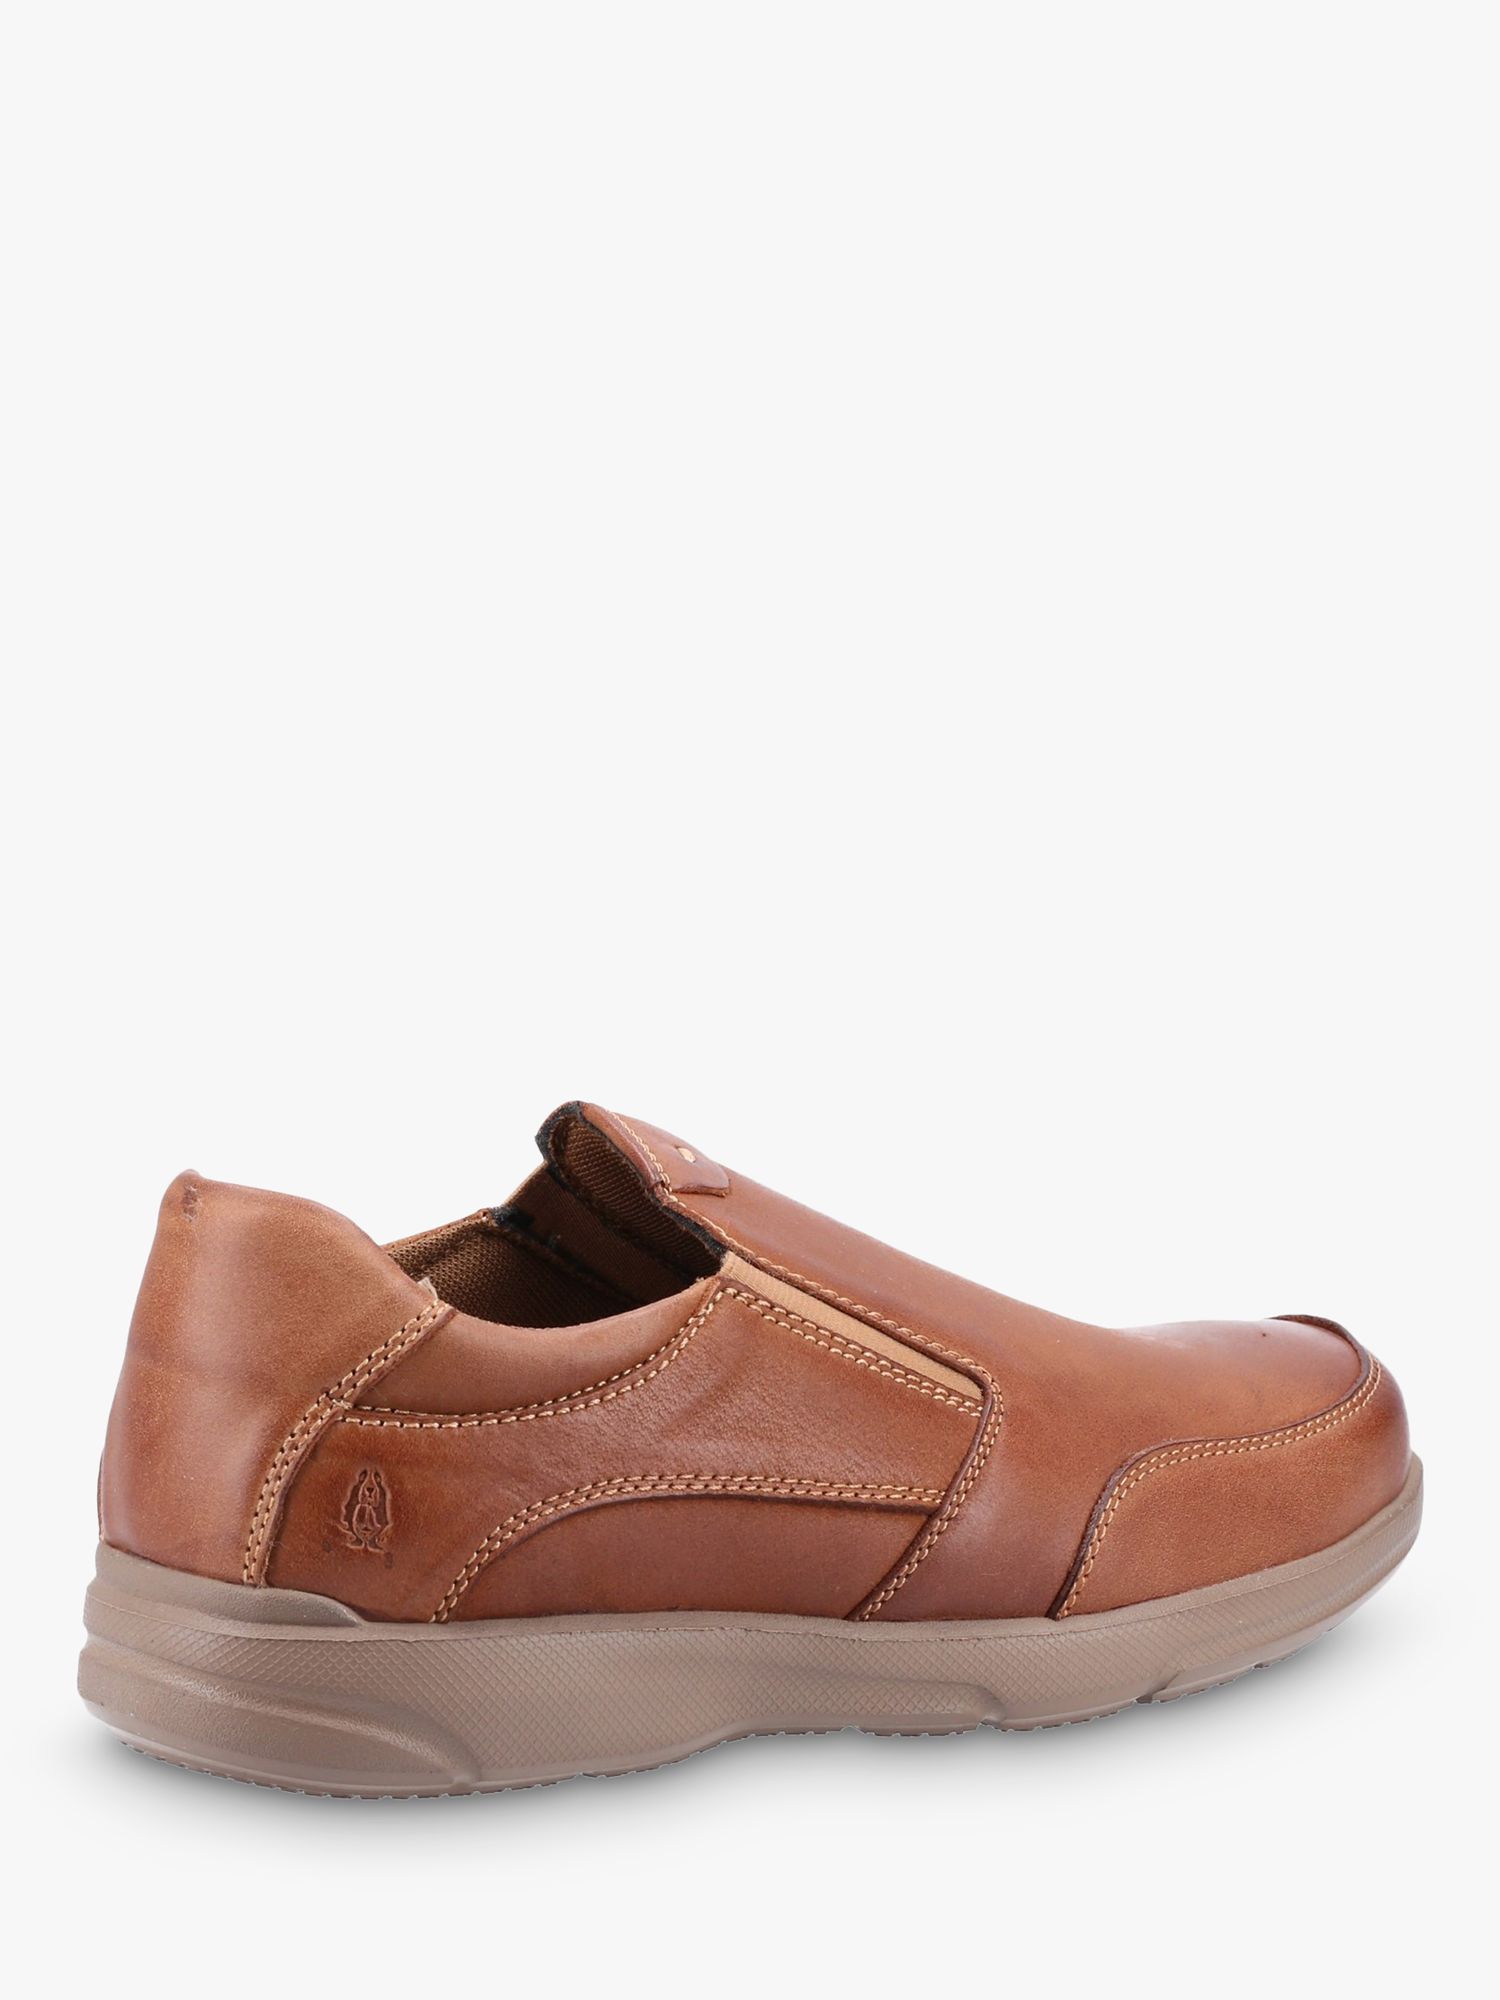 Hush Puppies Aaron Memory Foam Leather Slip On Shoes, Brown at John Lewis &  Partners